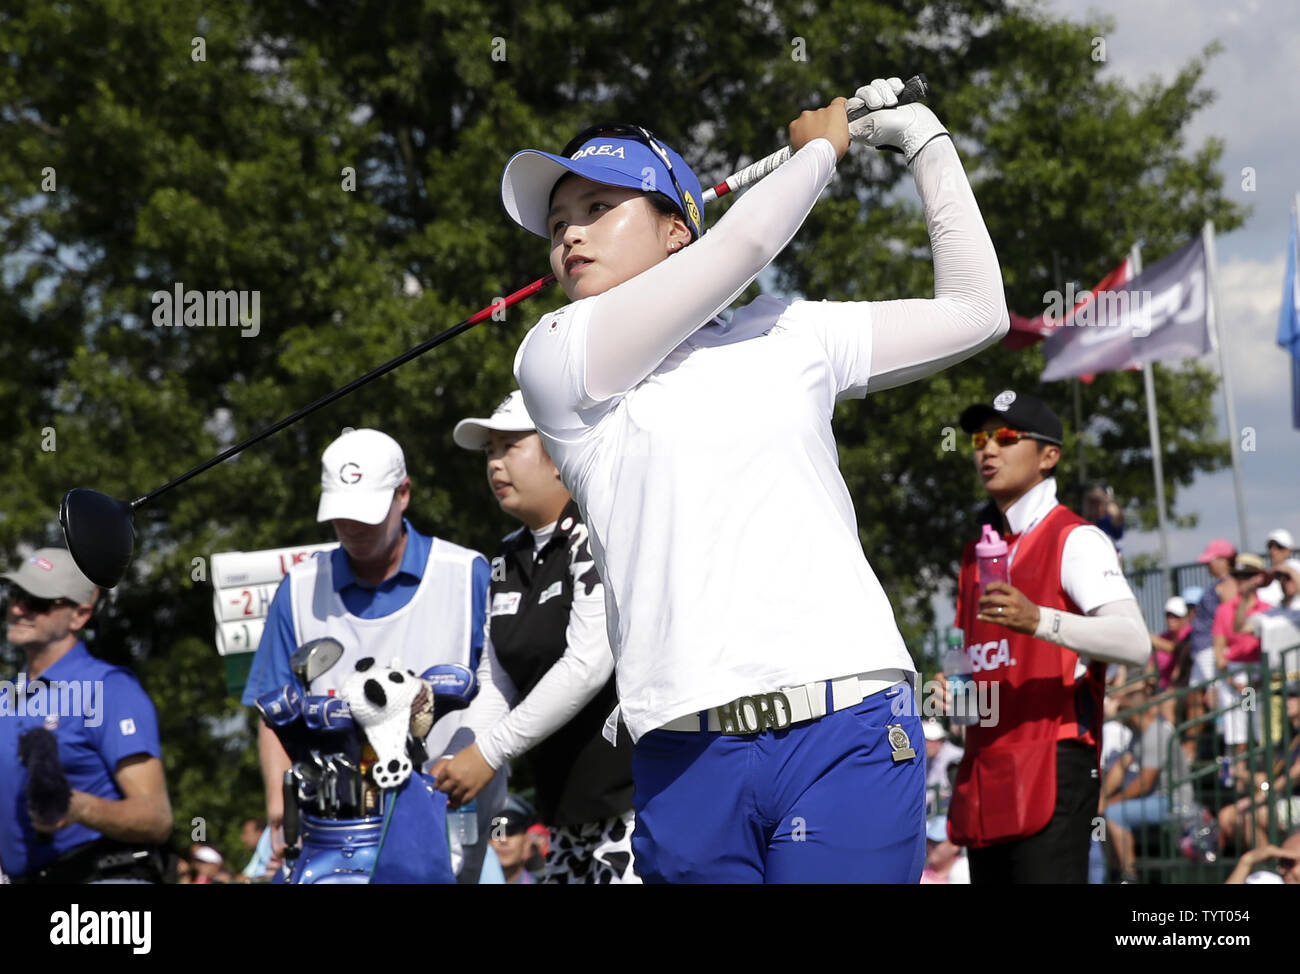 Amature Hye-Jin Choi of South Korea hits a tee shot on the 10th hole at Trump National Golf Club for the final round of the LPGA U.S. Women's Open Championship  in Bedminster, NJ on July 14, 2017.     Photo by John Angelillo/UPI Stock Photo